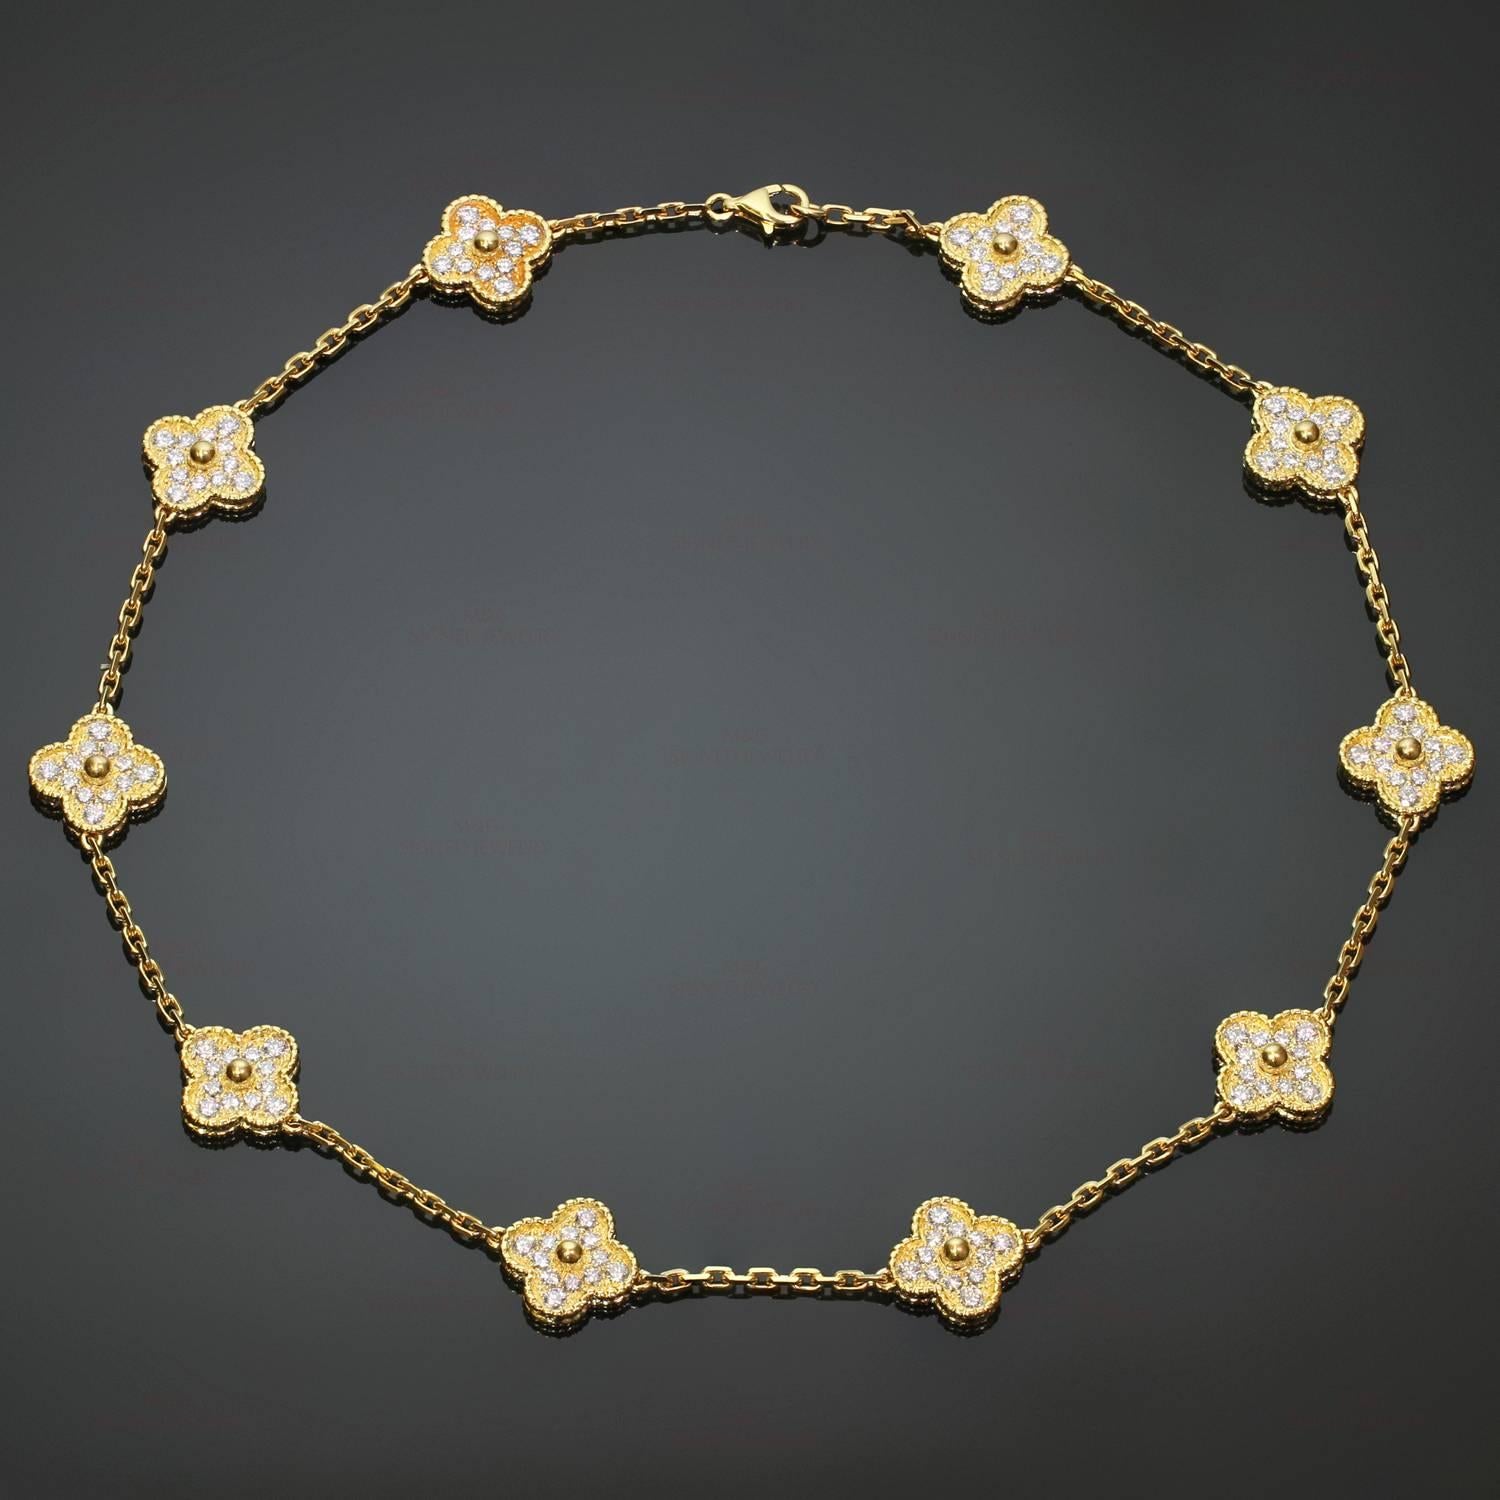 This fabulous Van Cleef & Arpels necklace from the classic Alhambra collection is crafted in 18k yellow gold and features 10 lucky clover motifs beautifully set with brilliant-cut round diamonds of an estimated 5.0 carats. Made in France circa